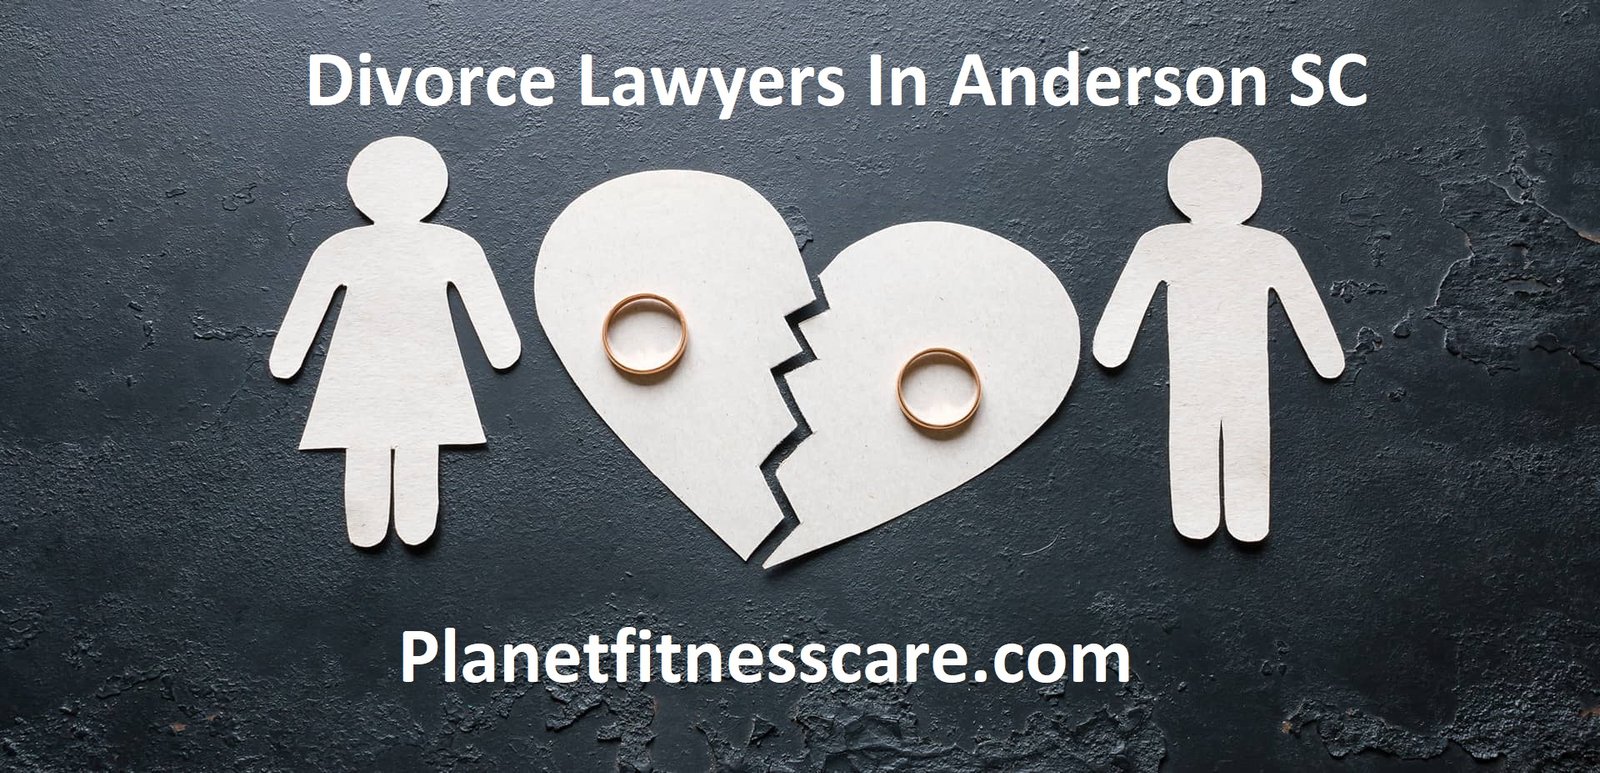 Divorce Lawyers In Anderson SC: History And Philosophy